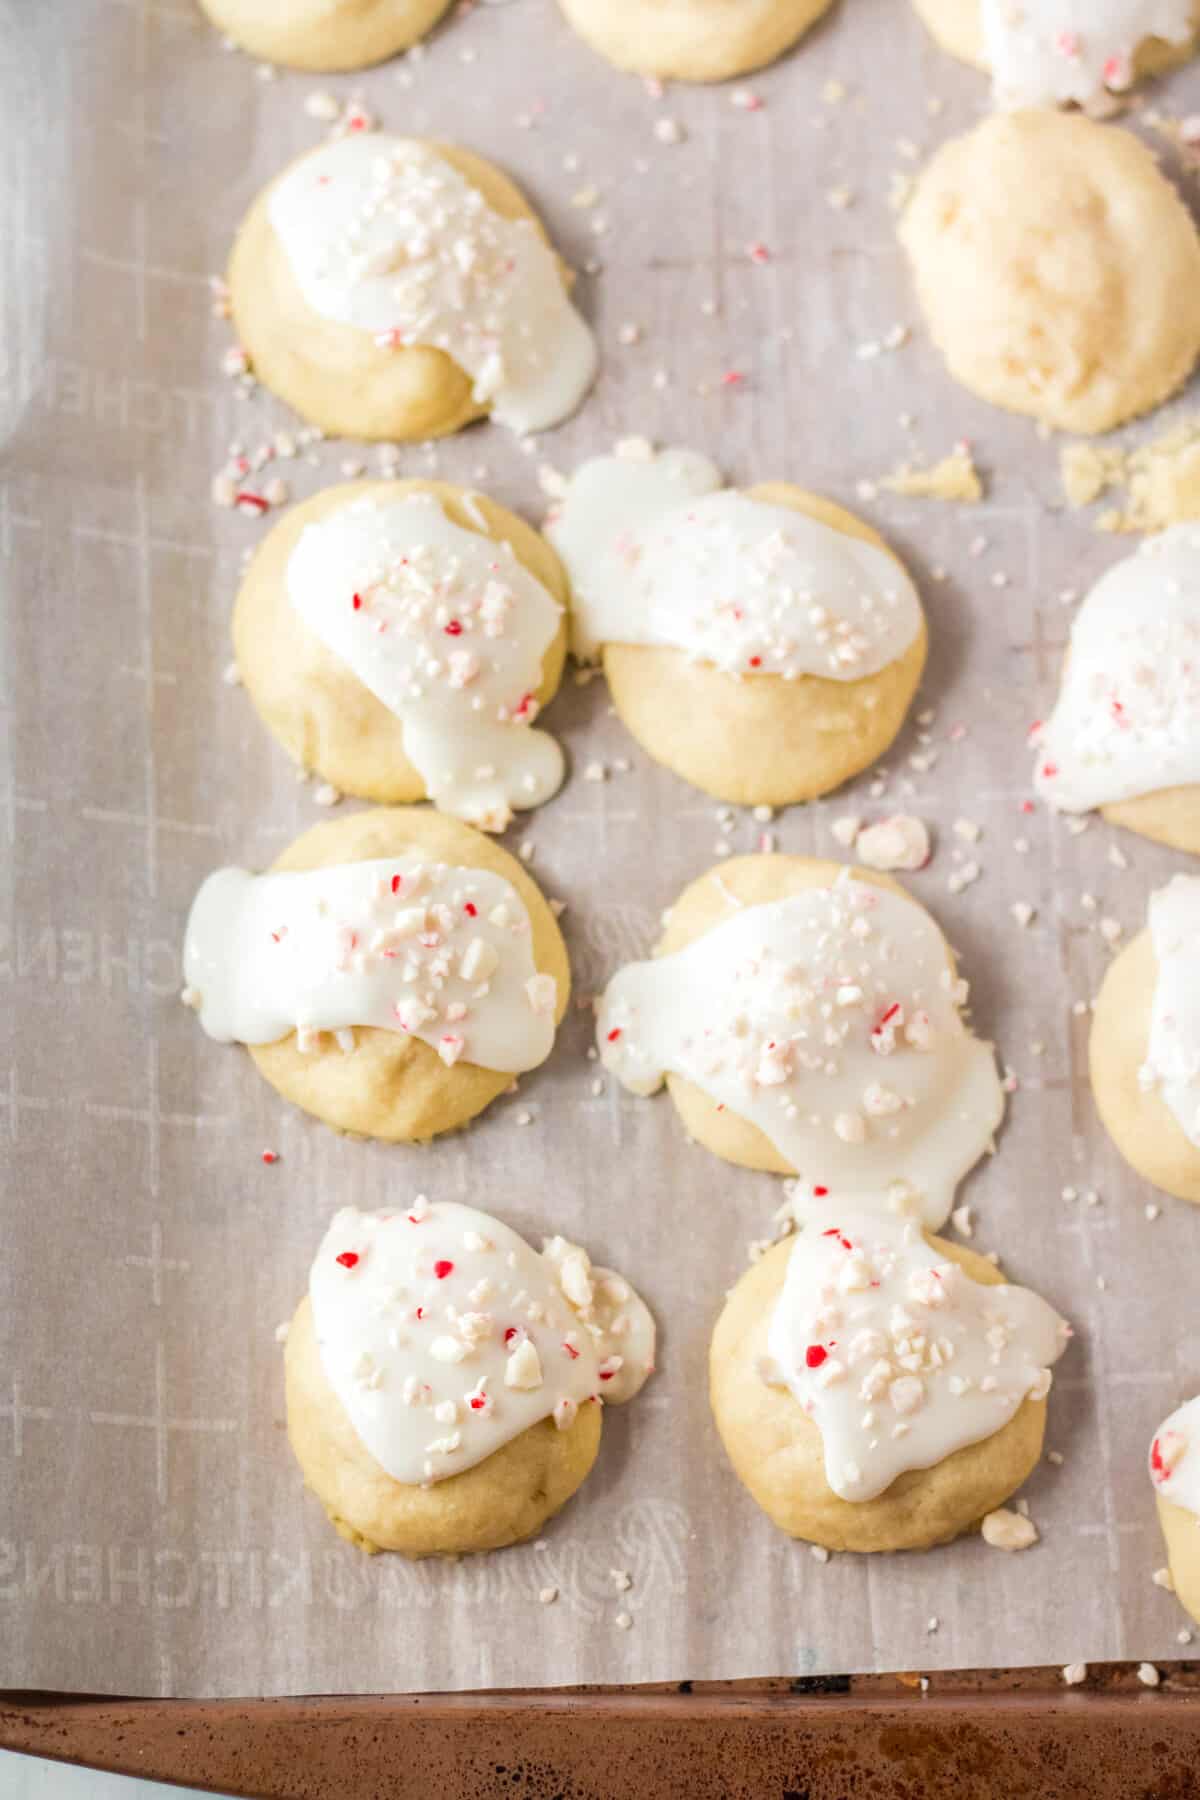 Iced cookies topped with peppermint on lined baking sheet.